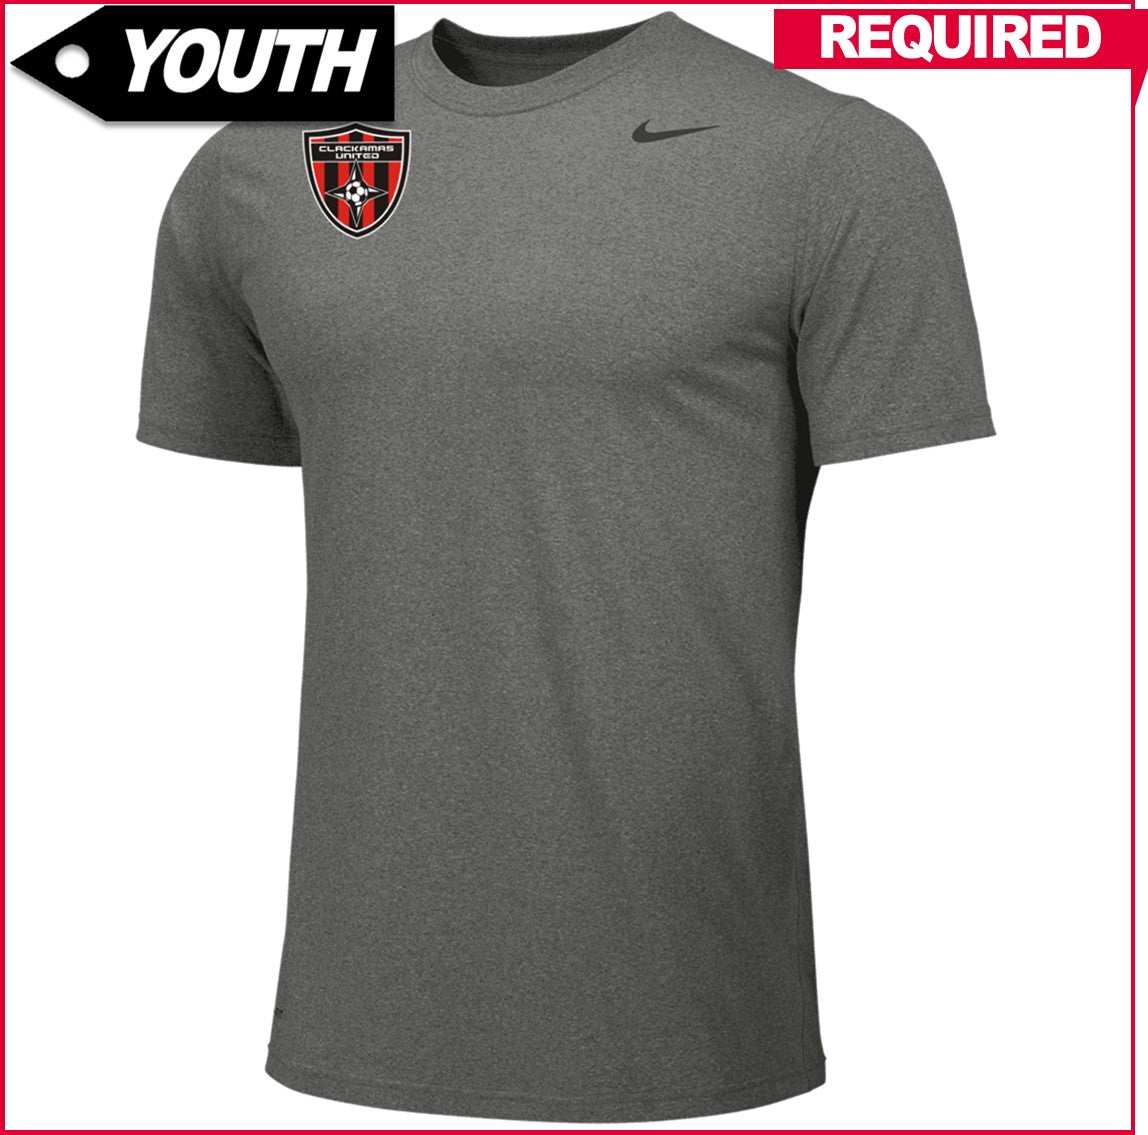 Clackamas United S/S Dri-Fit Practice Top [Youth]